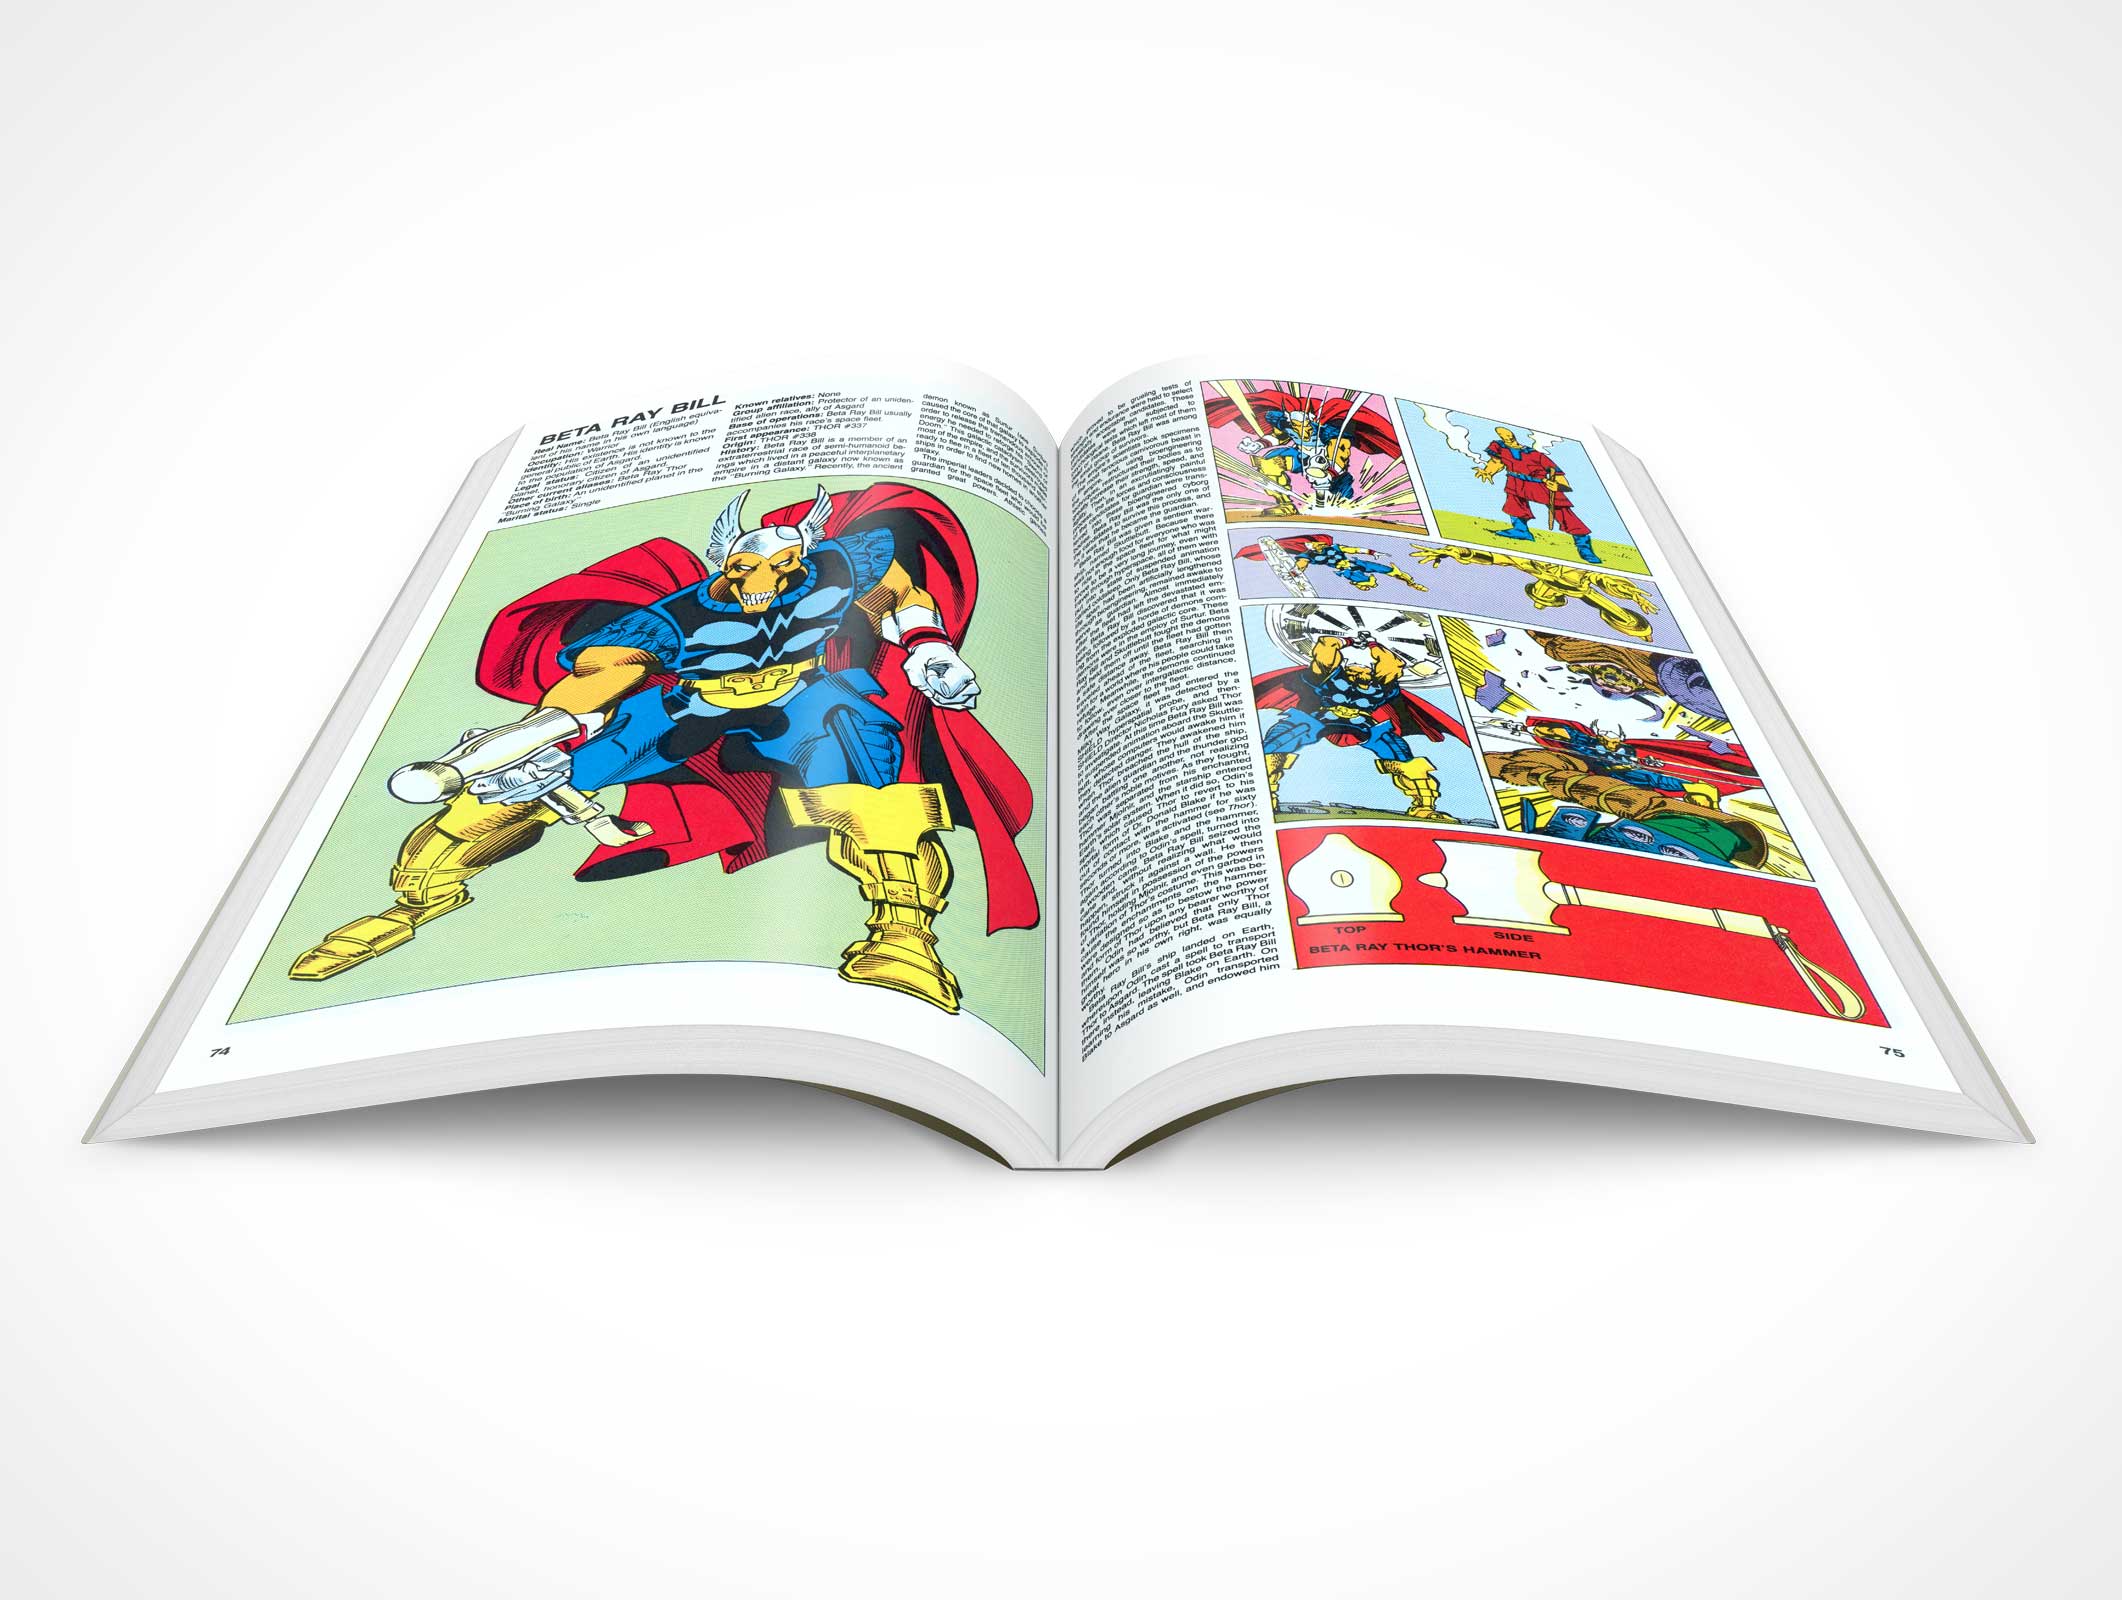 PSD Mockup Softcover Graphic Novel 30 Degree Top View